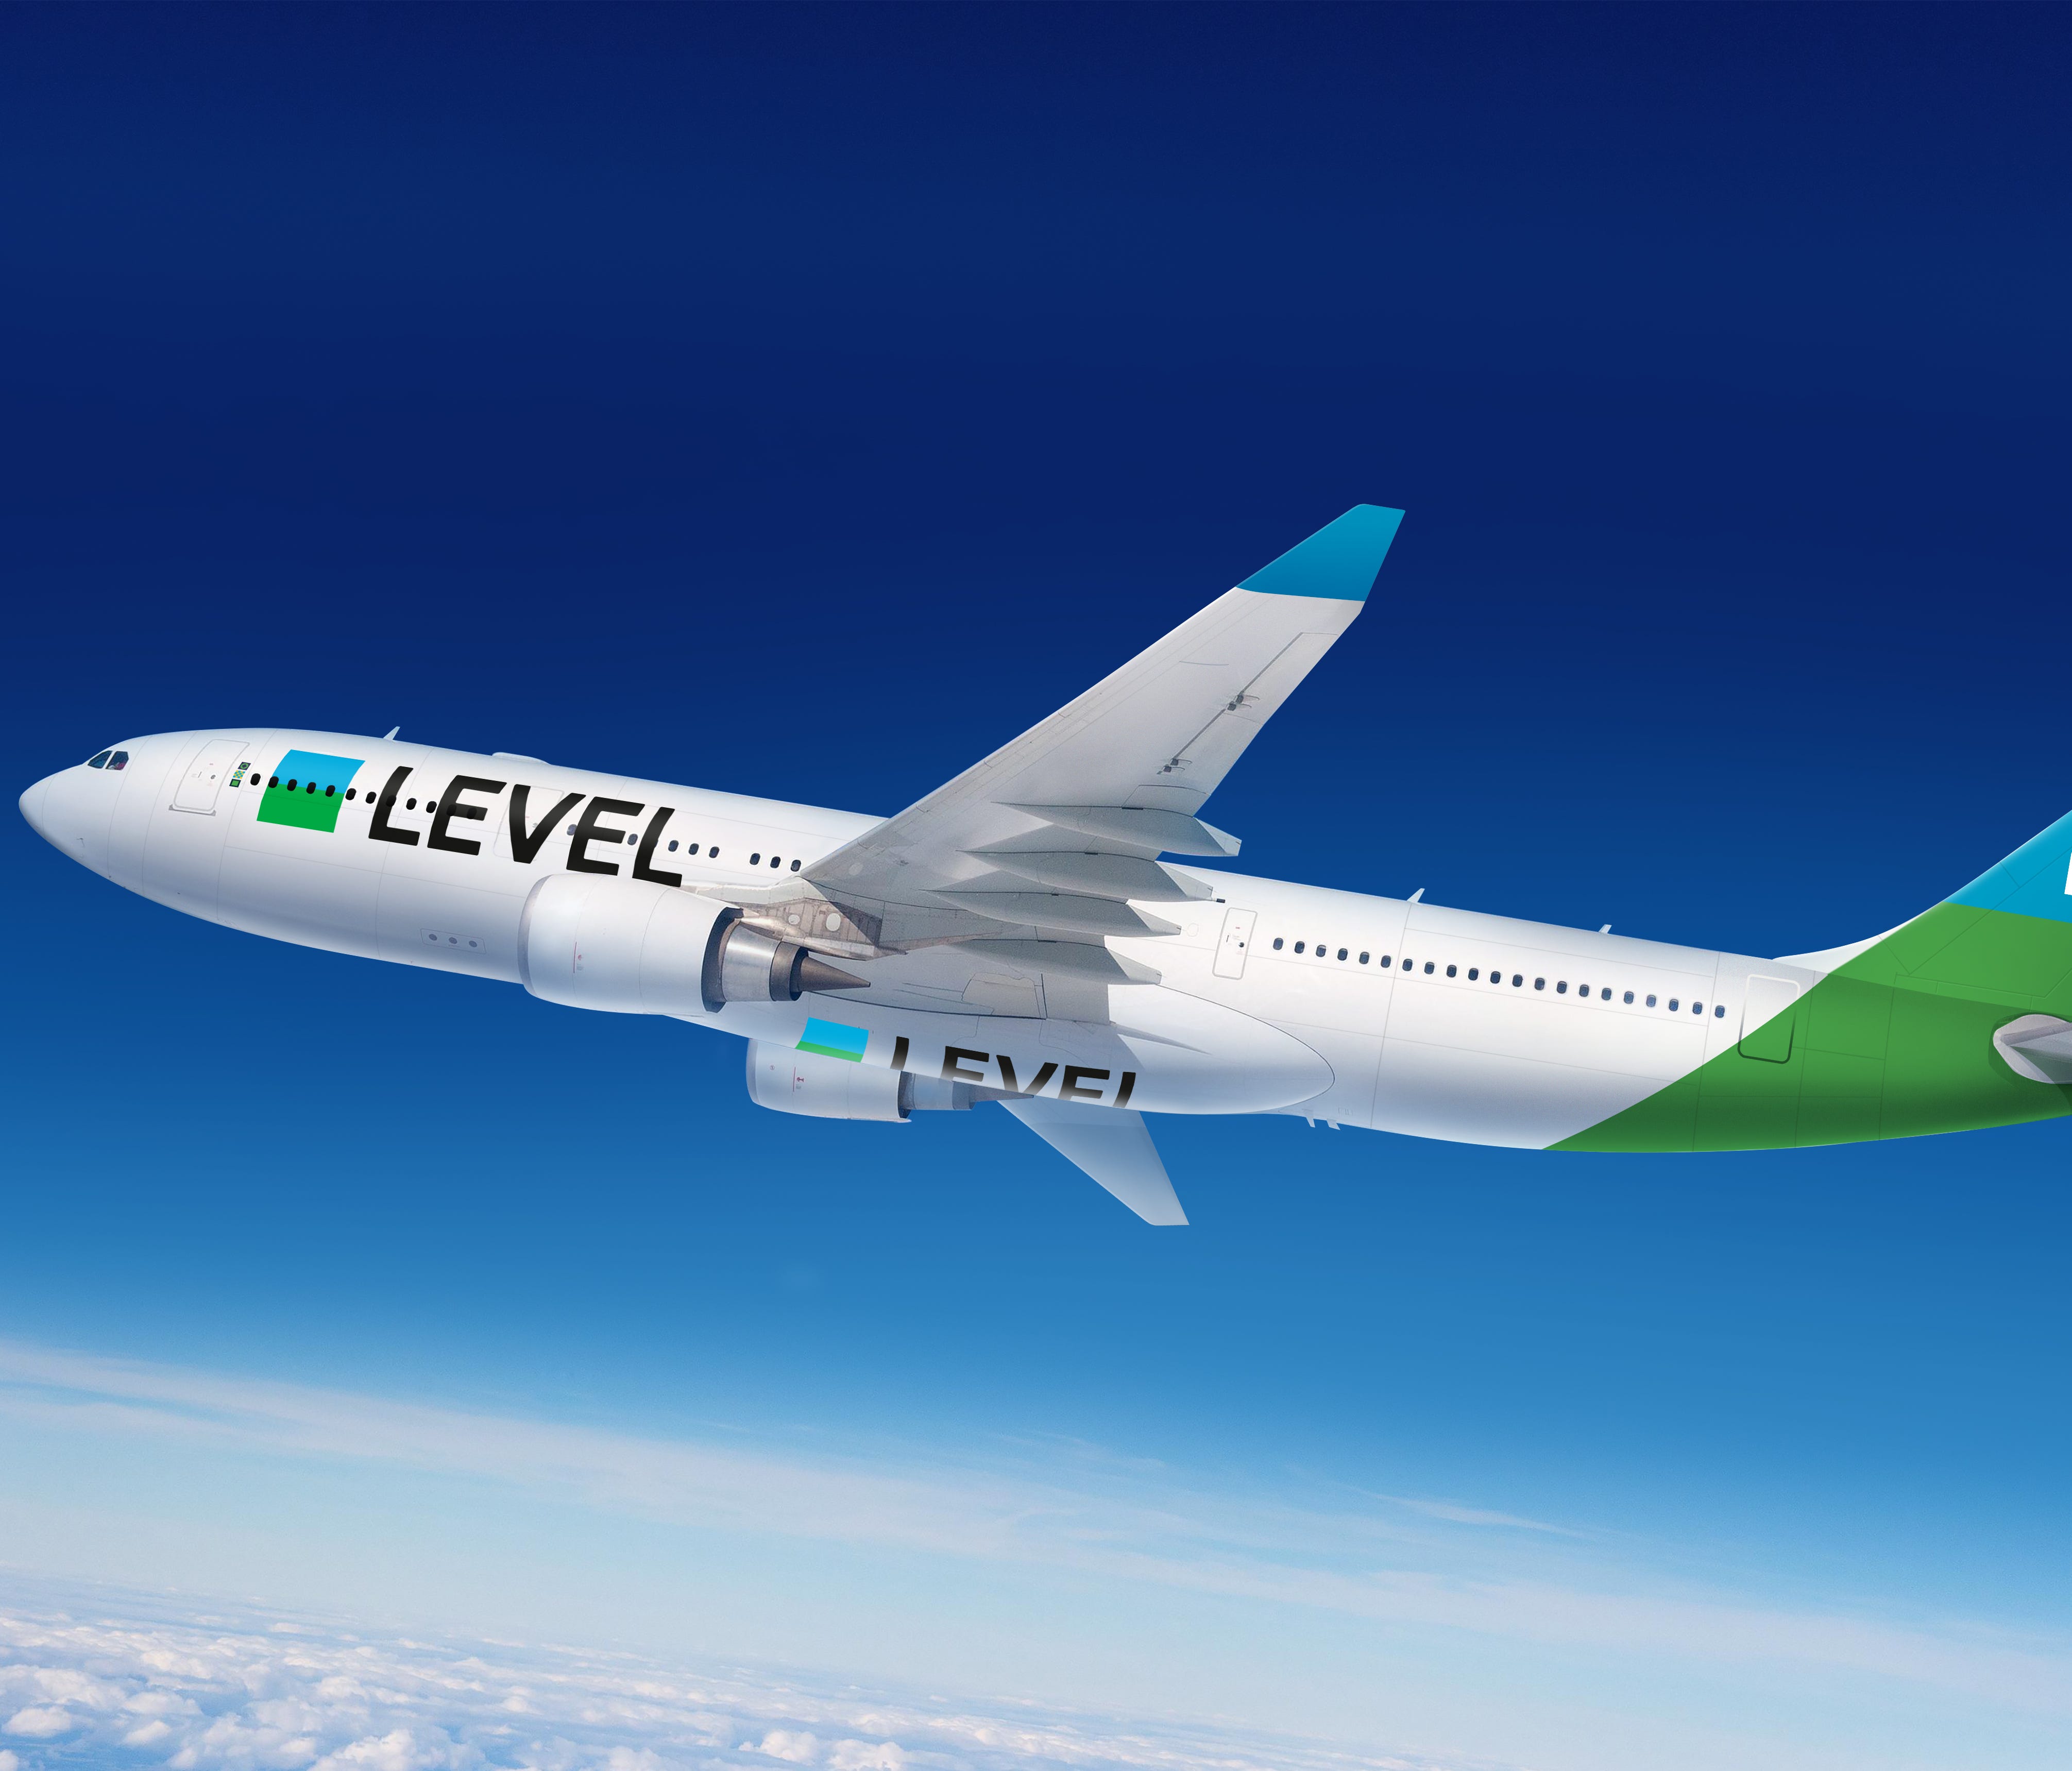 This image, provided by the International Airlines Group (IAG), shows the paint scheme planned for the company's start-up budget airline: Level.